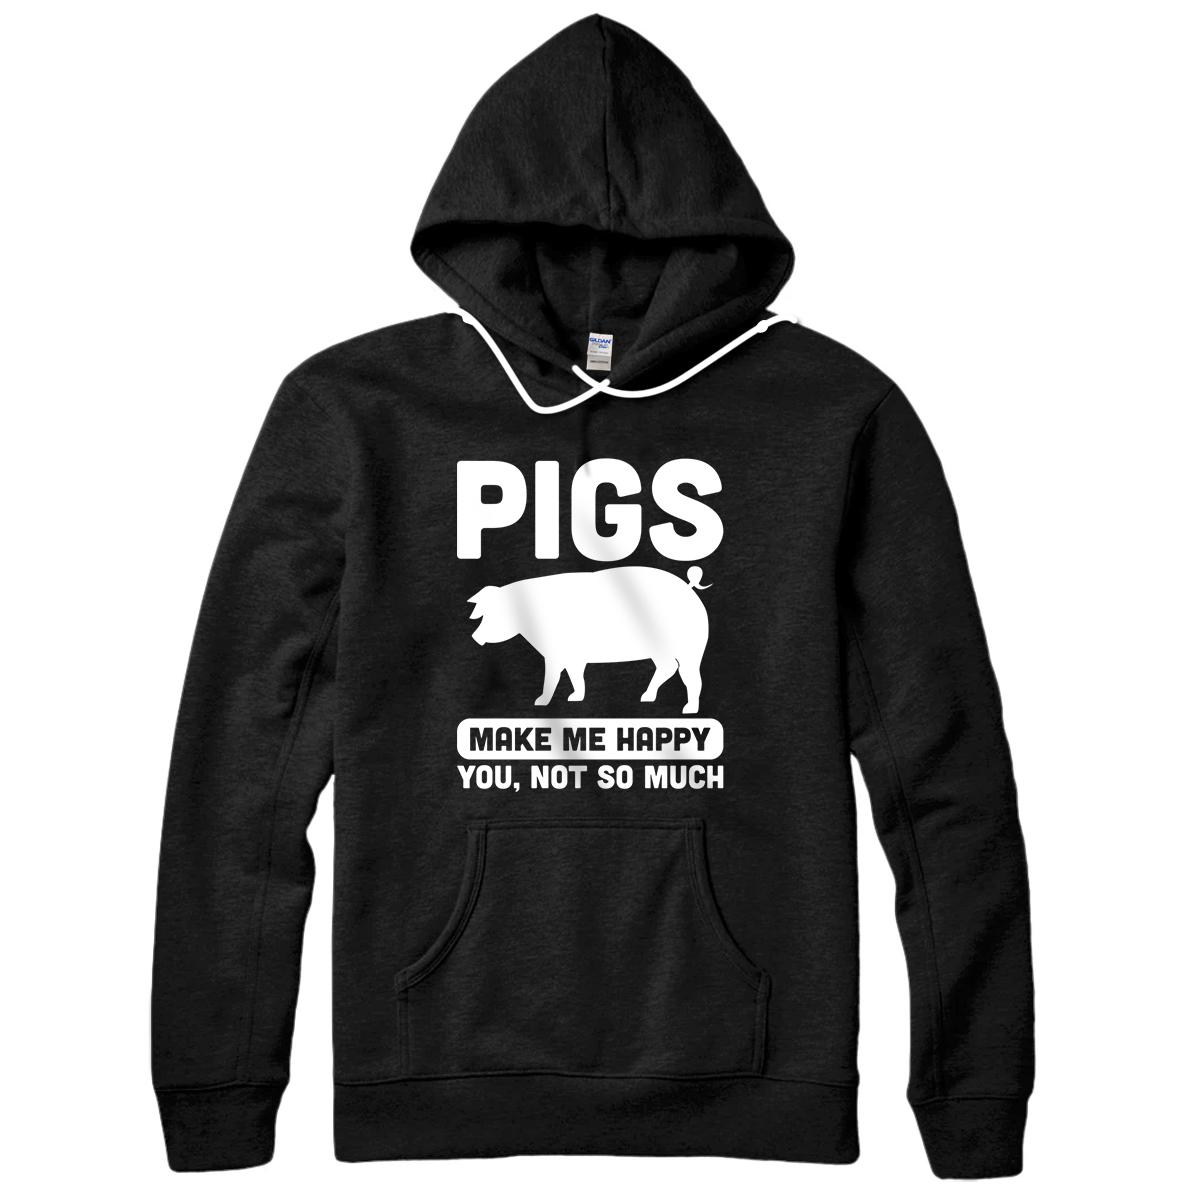 Personalized Funny Pigs Make me Happy Design for Pig Farmers Pullover Hoodie